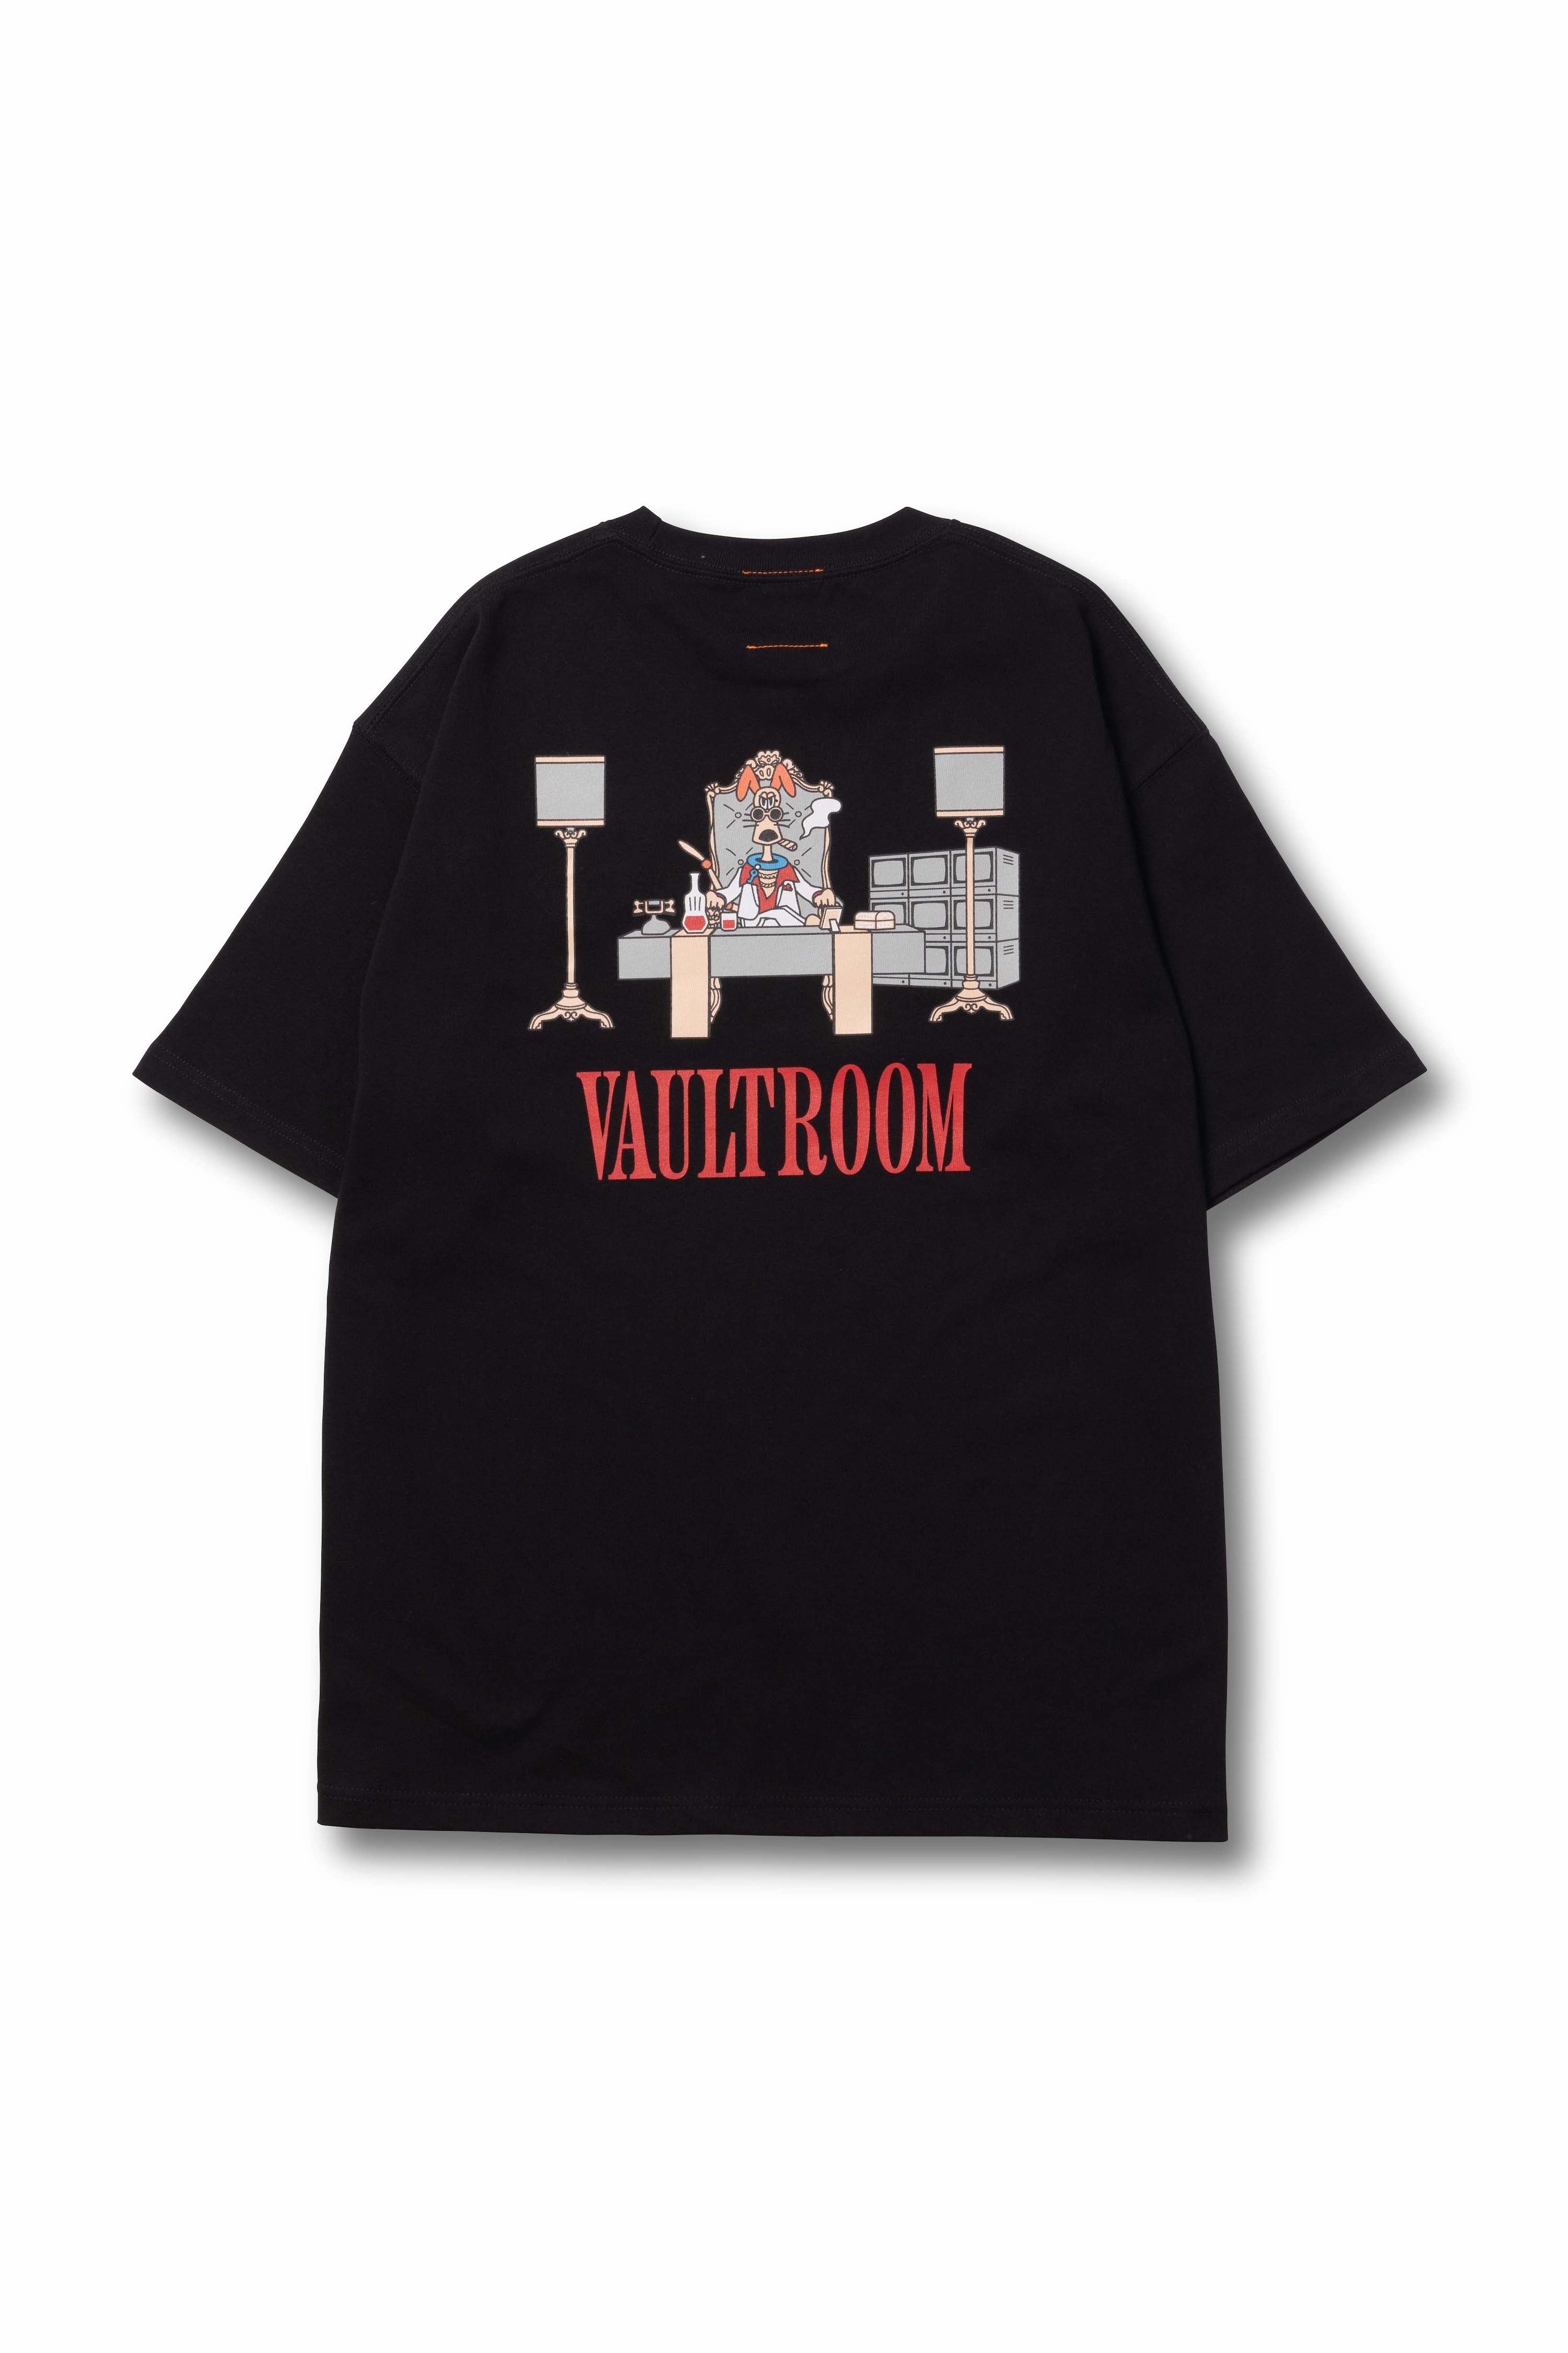 VRvaultroom HIDEOUT OFFICE TEE - Tシャツ/カットソー(半袖/袖なし)